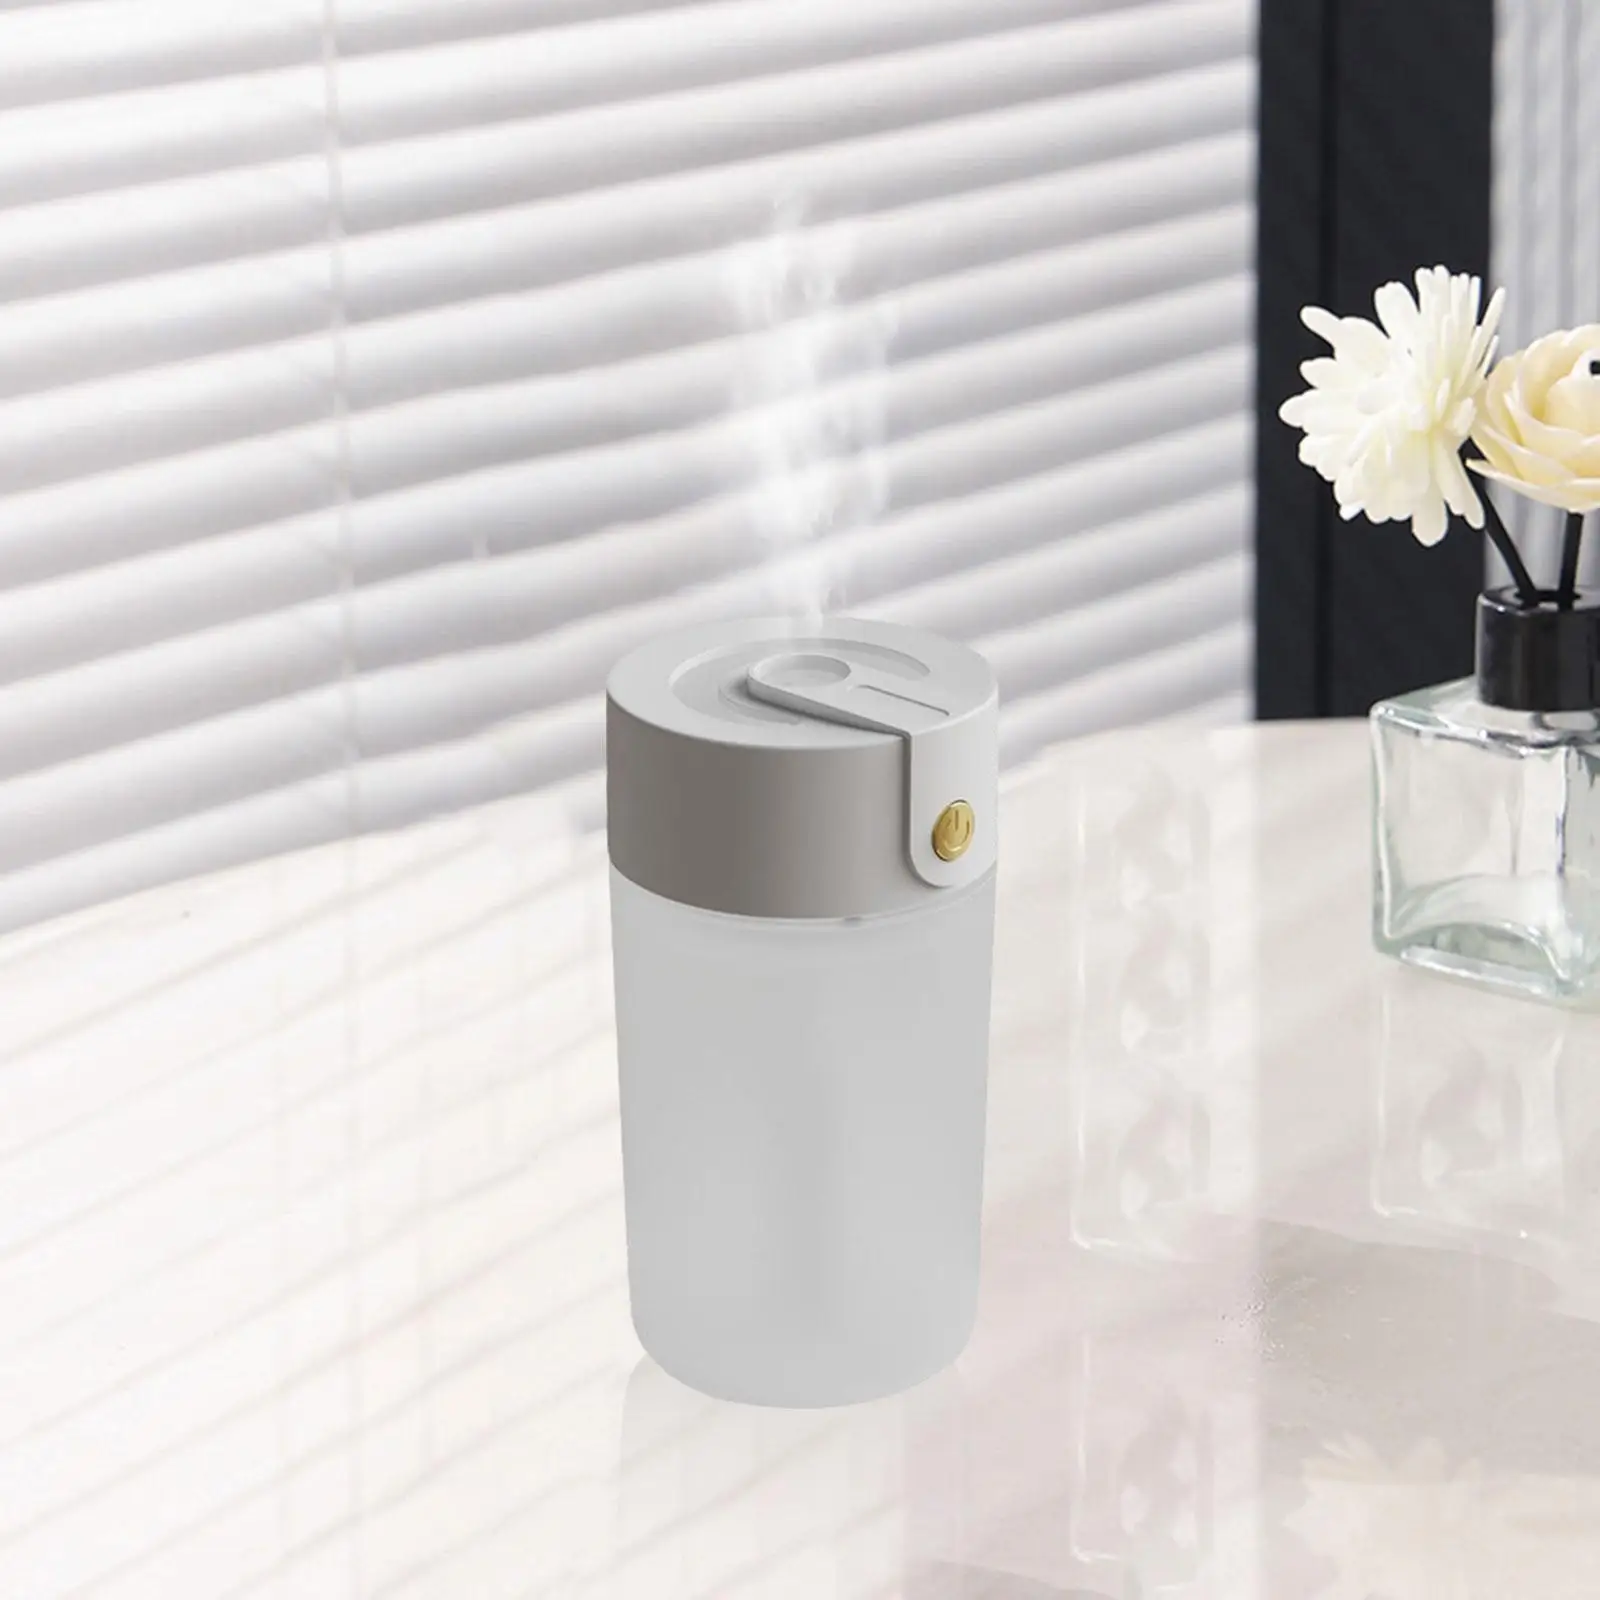 Small Mist Humidifier Quiet Portable Car Humidifier Diffuser Desktop Humidifier for Baby Room Study Room Car Bedroom Travel